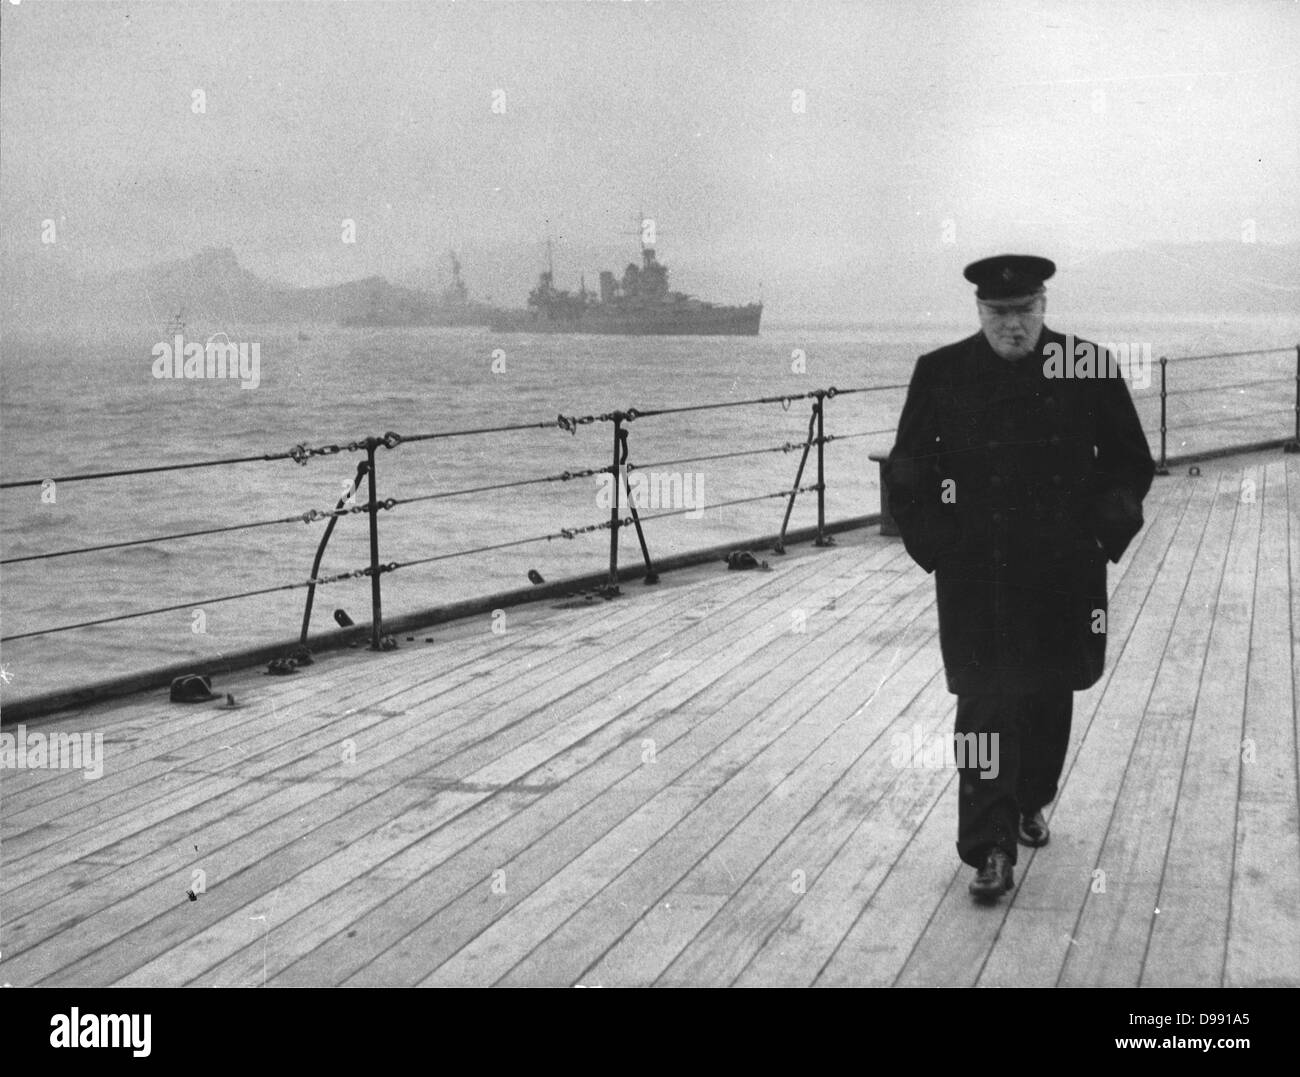 World War II: Winston Spencer Churchill (1874-1965) British statesman, in overcoat and hat and smoking a cigar, walking alone on the deck of HMS 'Prince of Wales' during the Atlantic Conference, 1941. Stock Photo